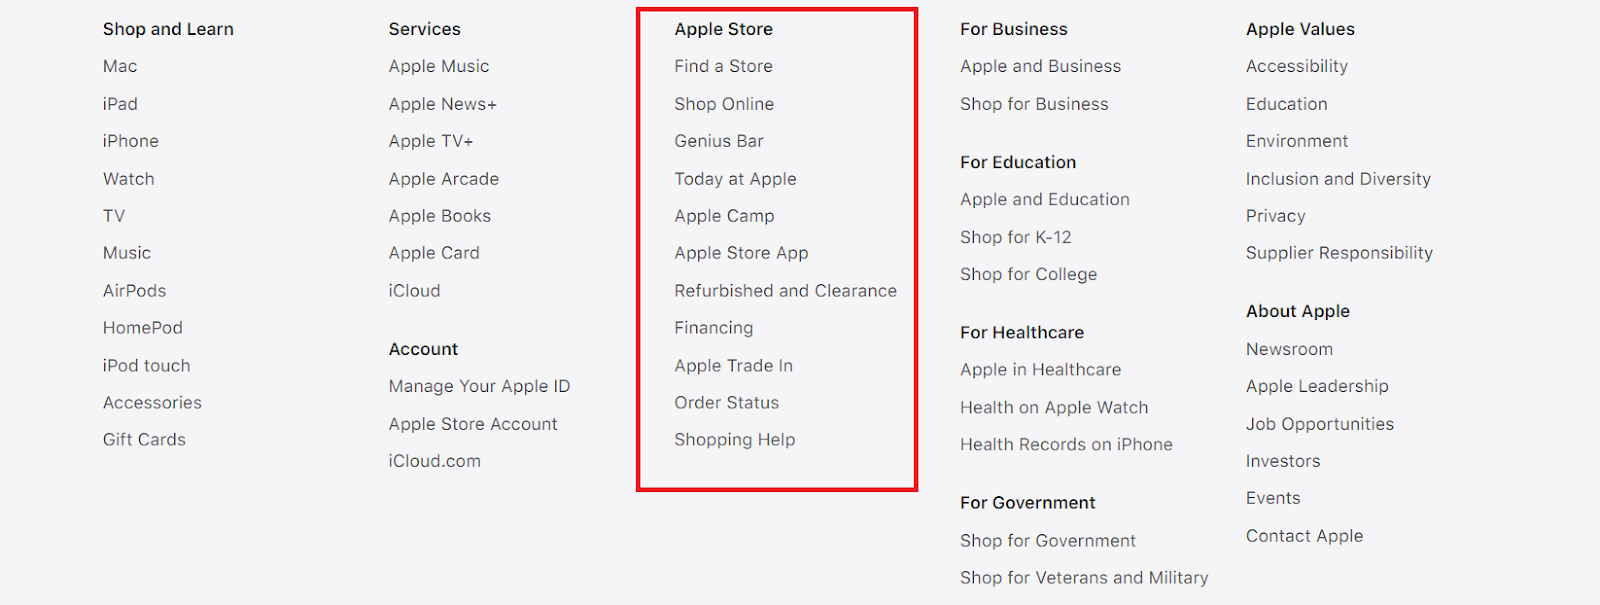 apple's footer